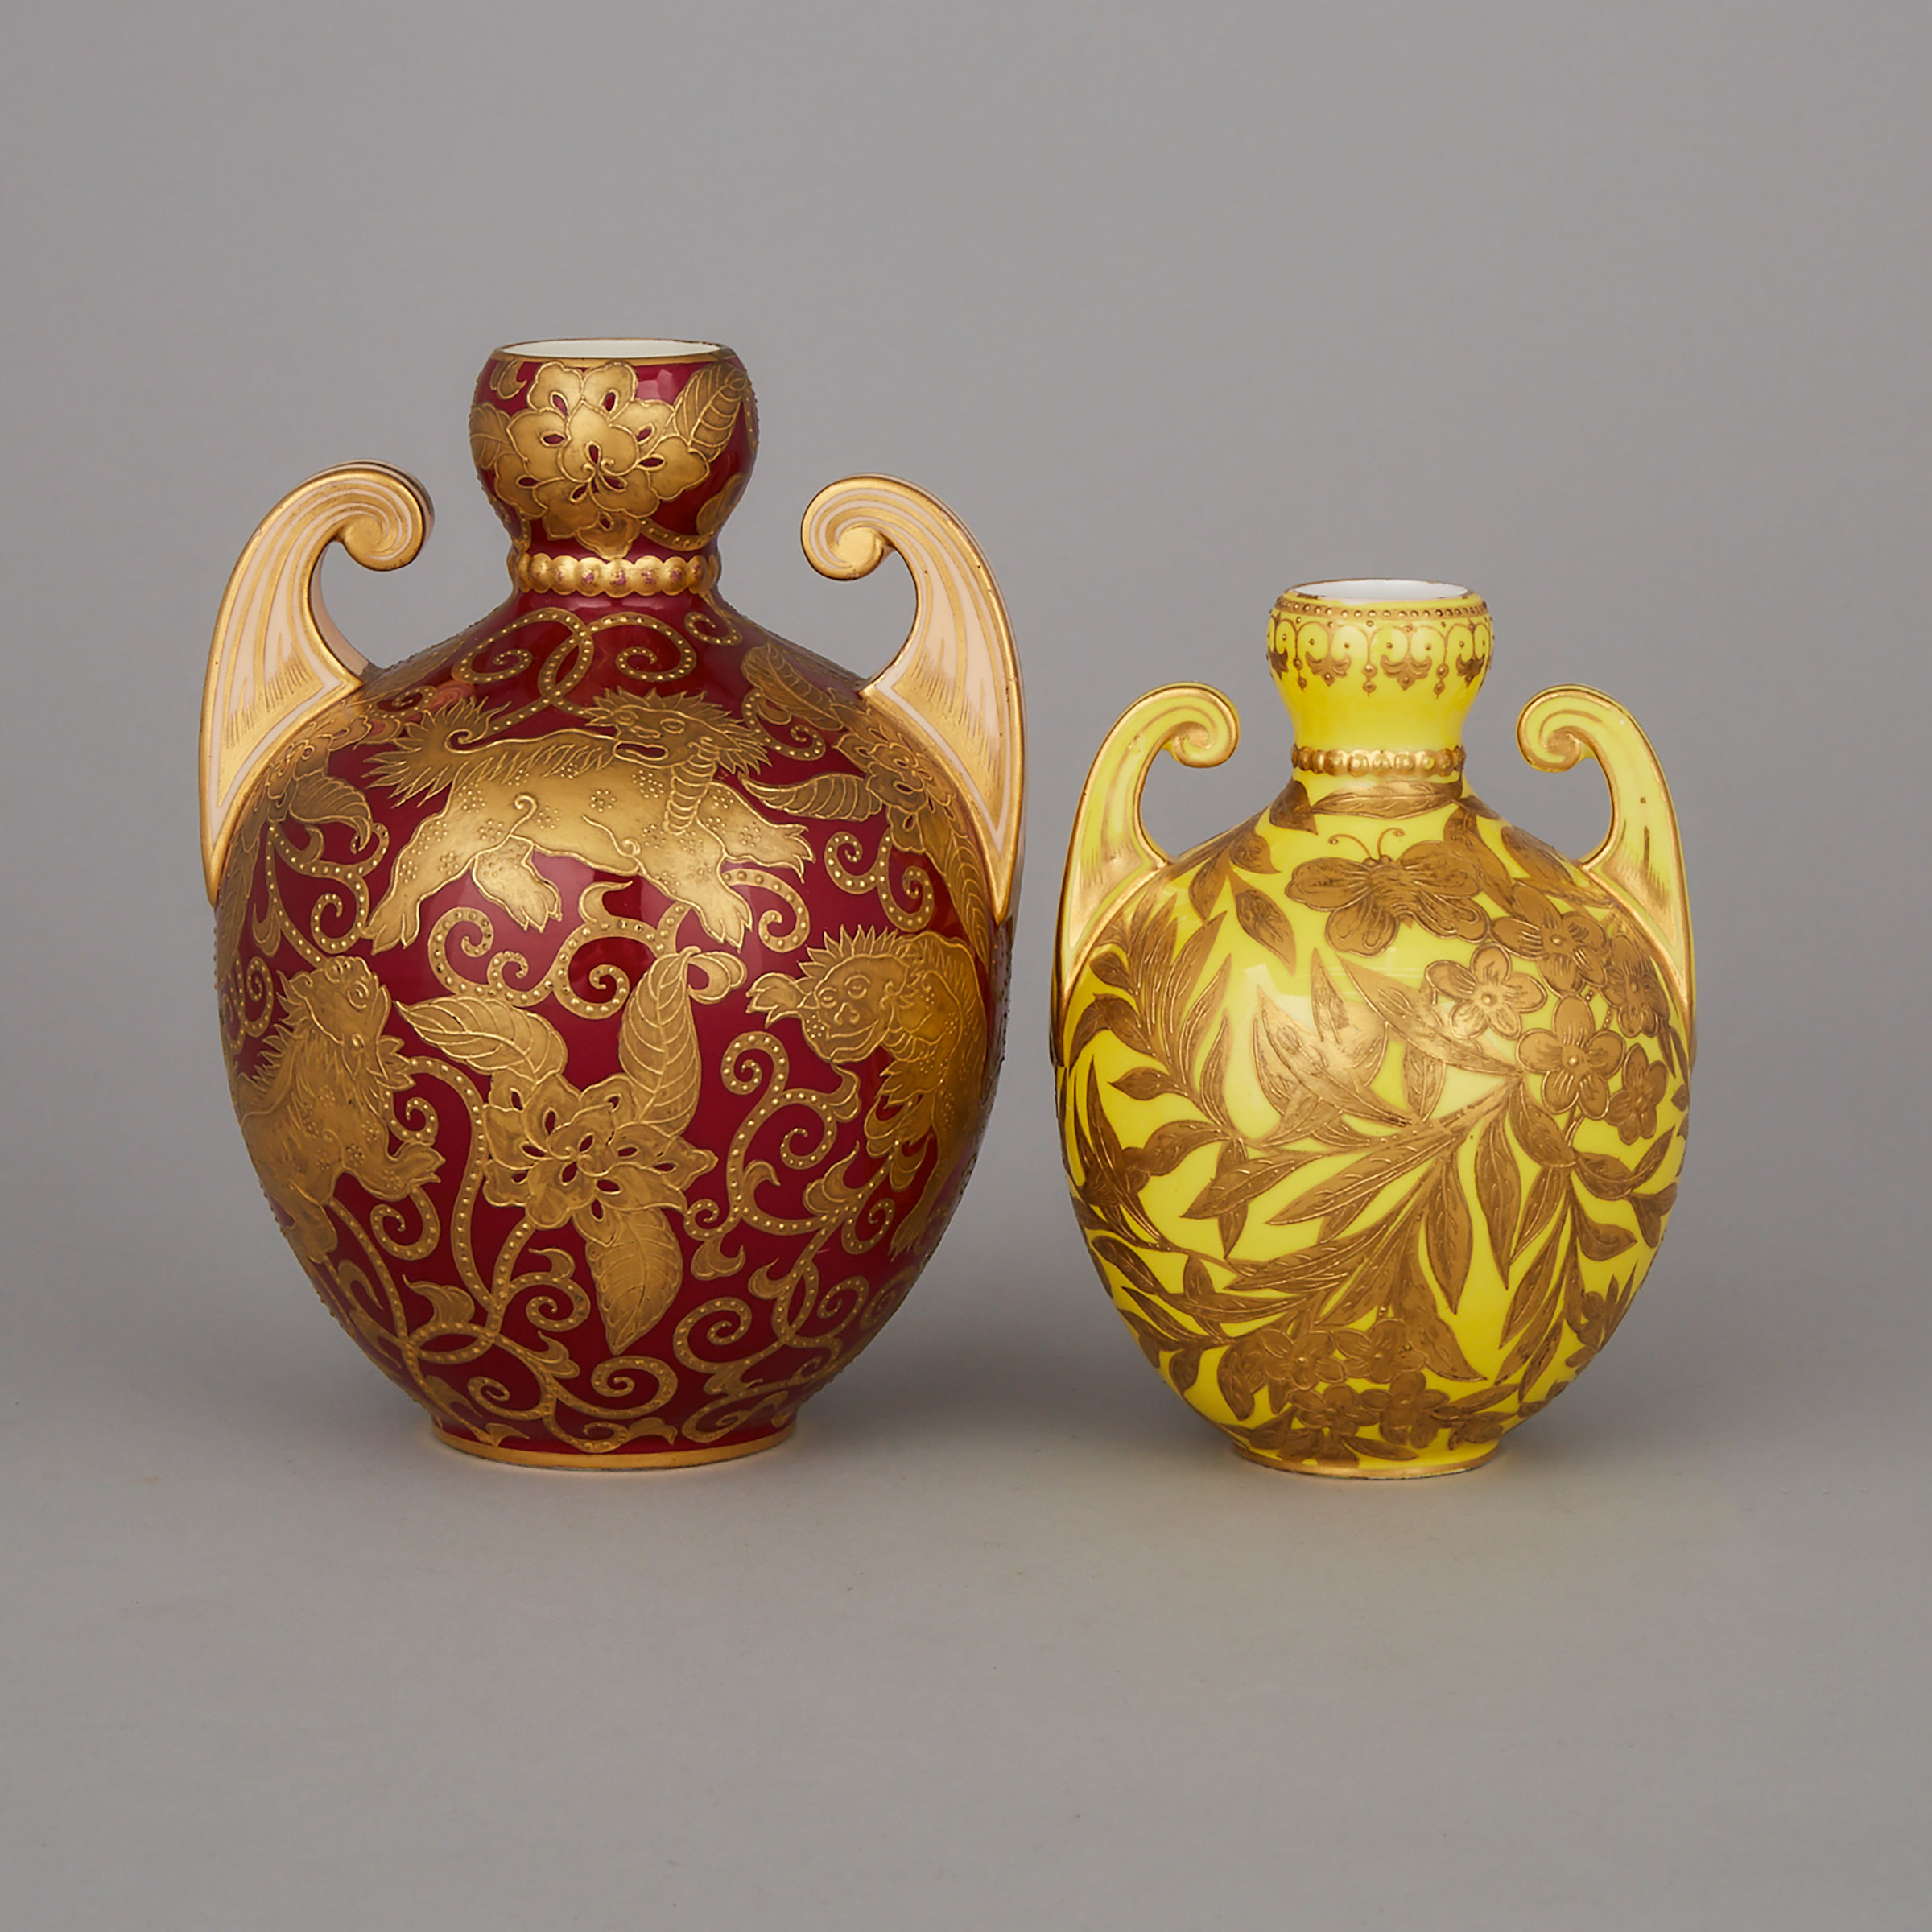 Two Derby Crown Porcelain Co. Gilt Decorated Two-Handled Vases, 1880s